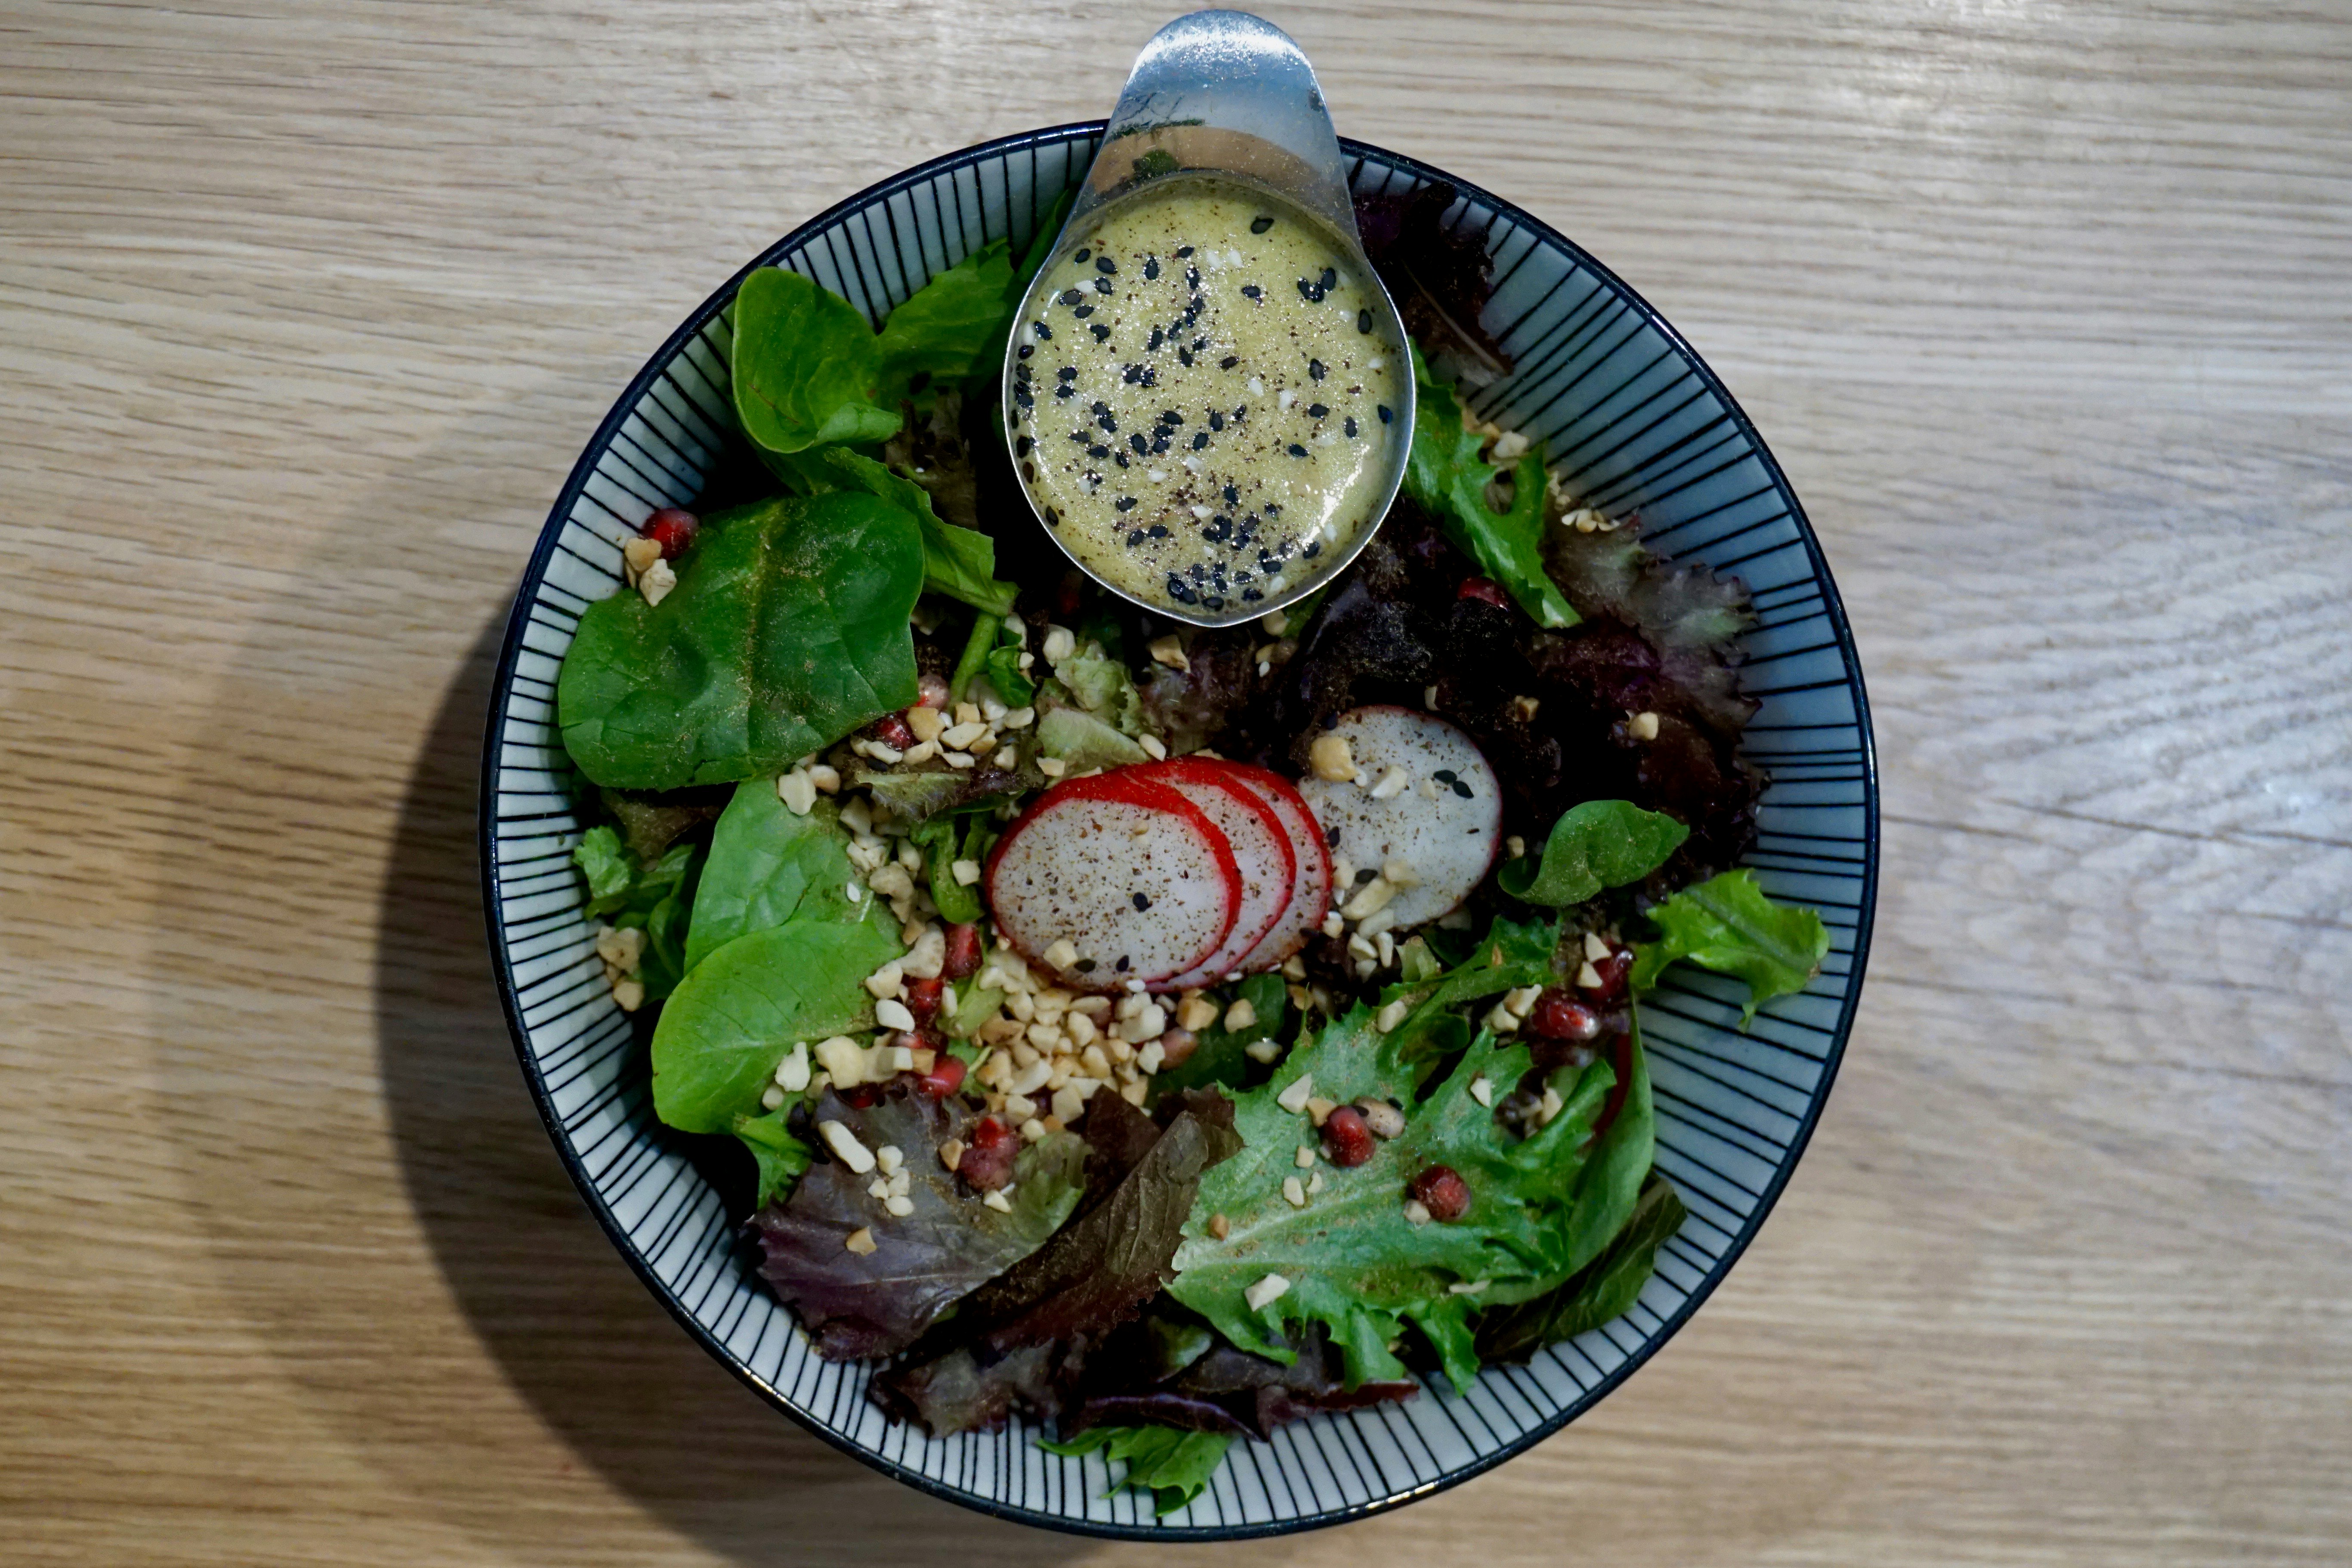 A stripy ceramic bowl sitting on a blond wood table. The bowl is filled with leaves and colourful salad ingredients and there's a stainless steel ramekin filled with dressing on the side.